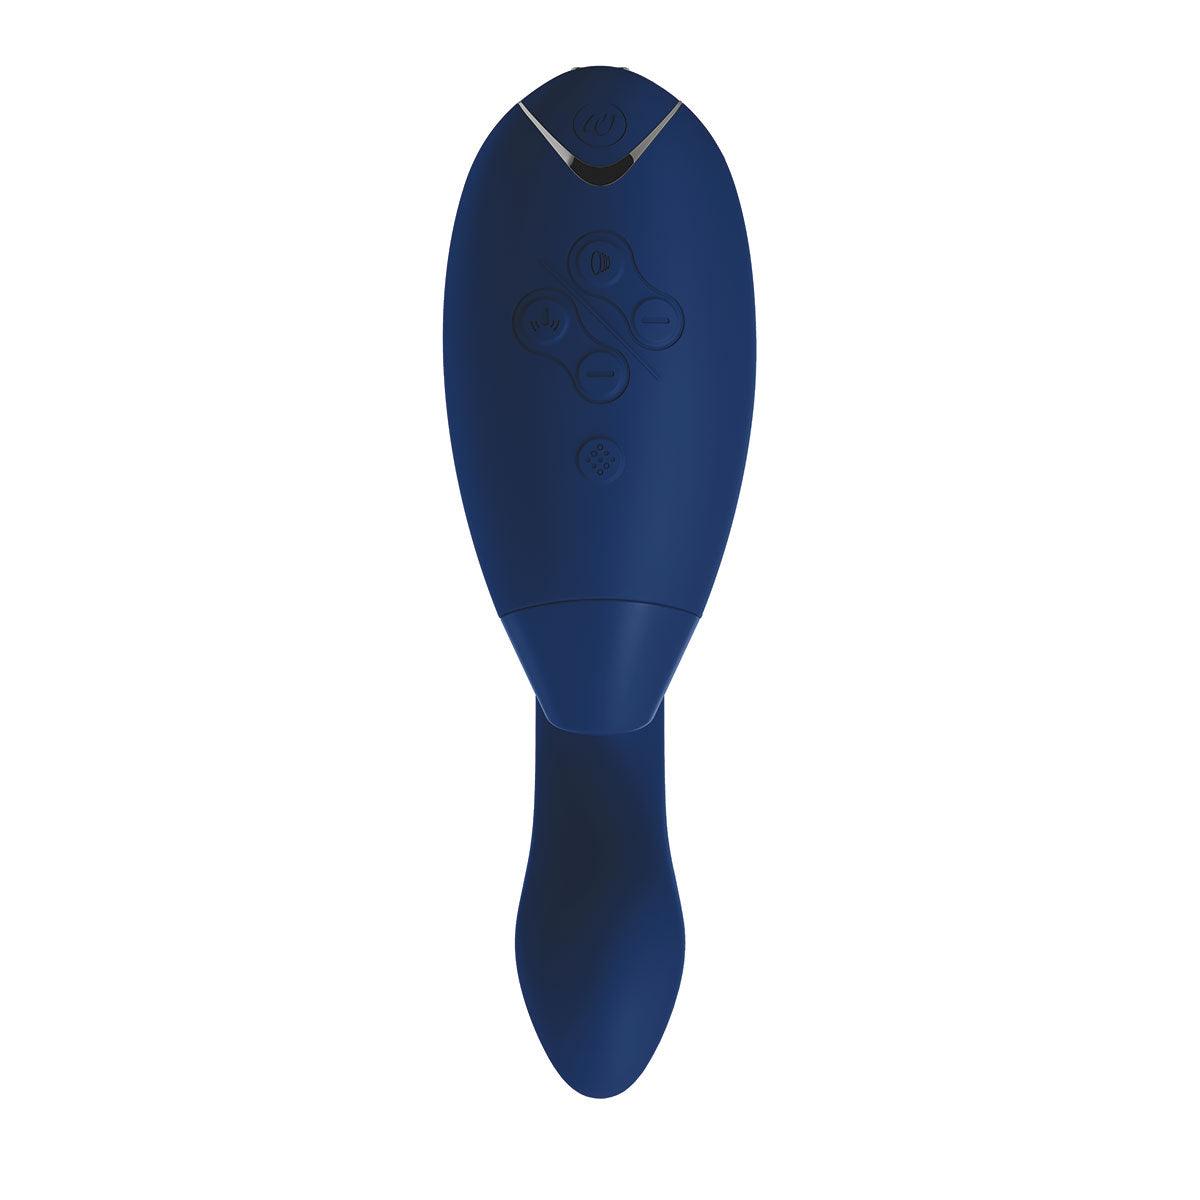 Womanizer Duo - Blueberry - shop enby